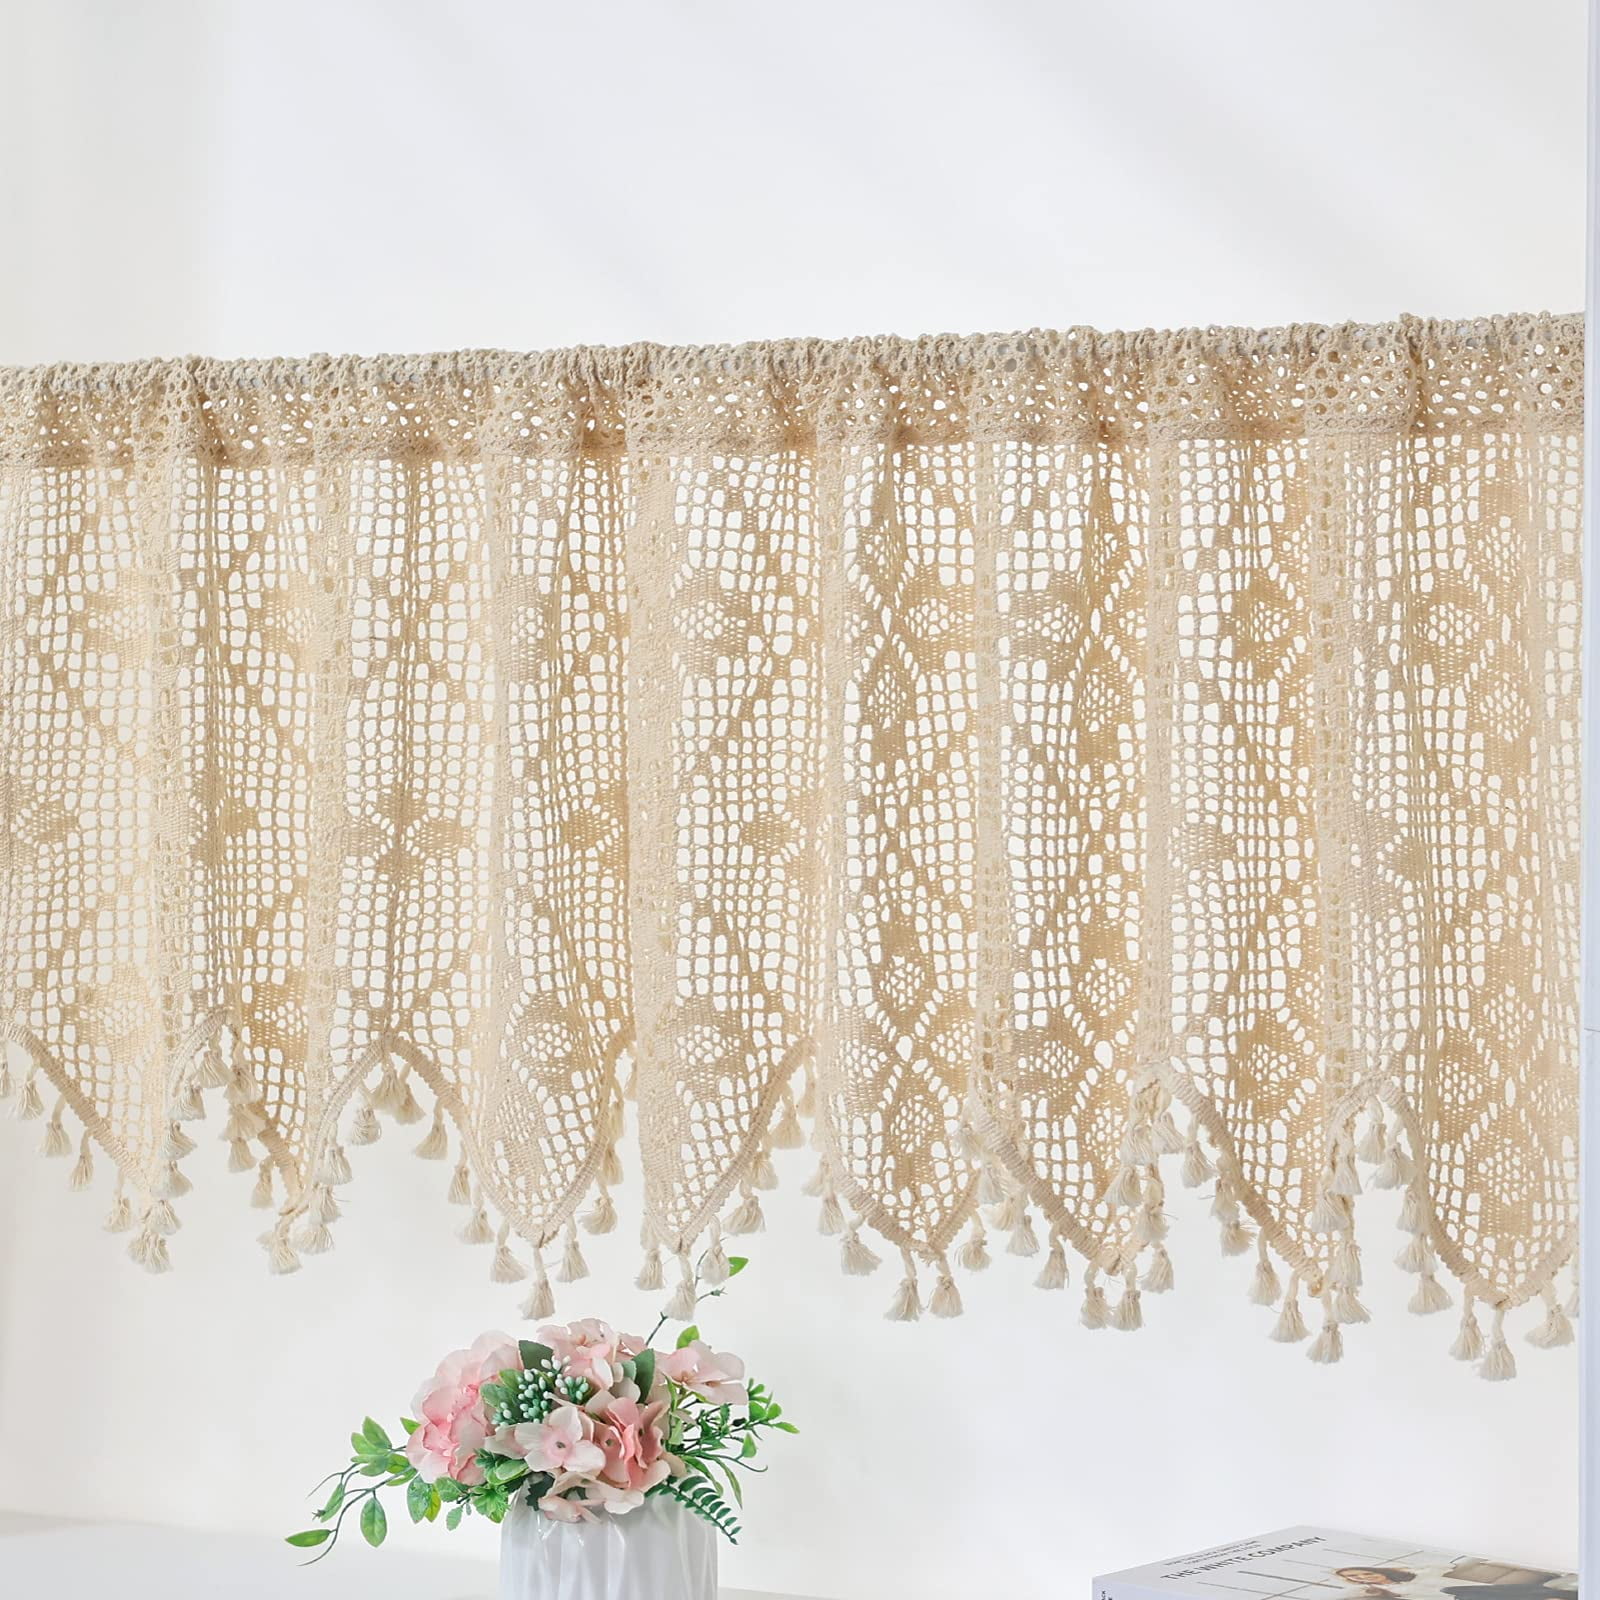 Filet Crochet Cafe Curtains Inspired by Mary Card Designs – Long